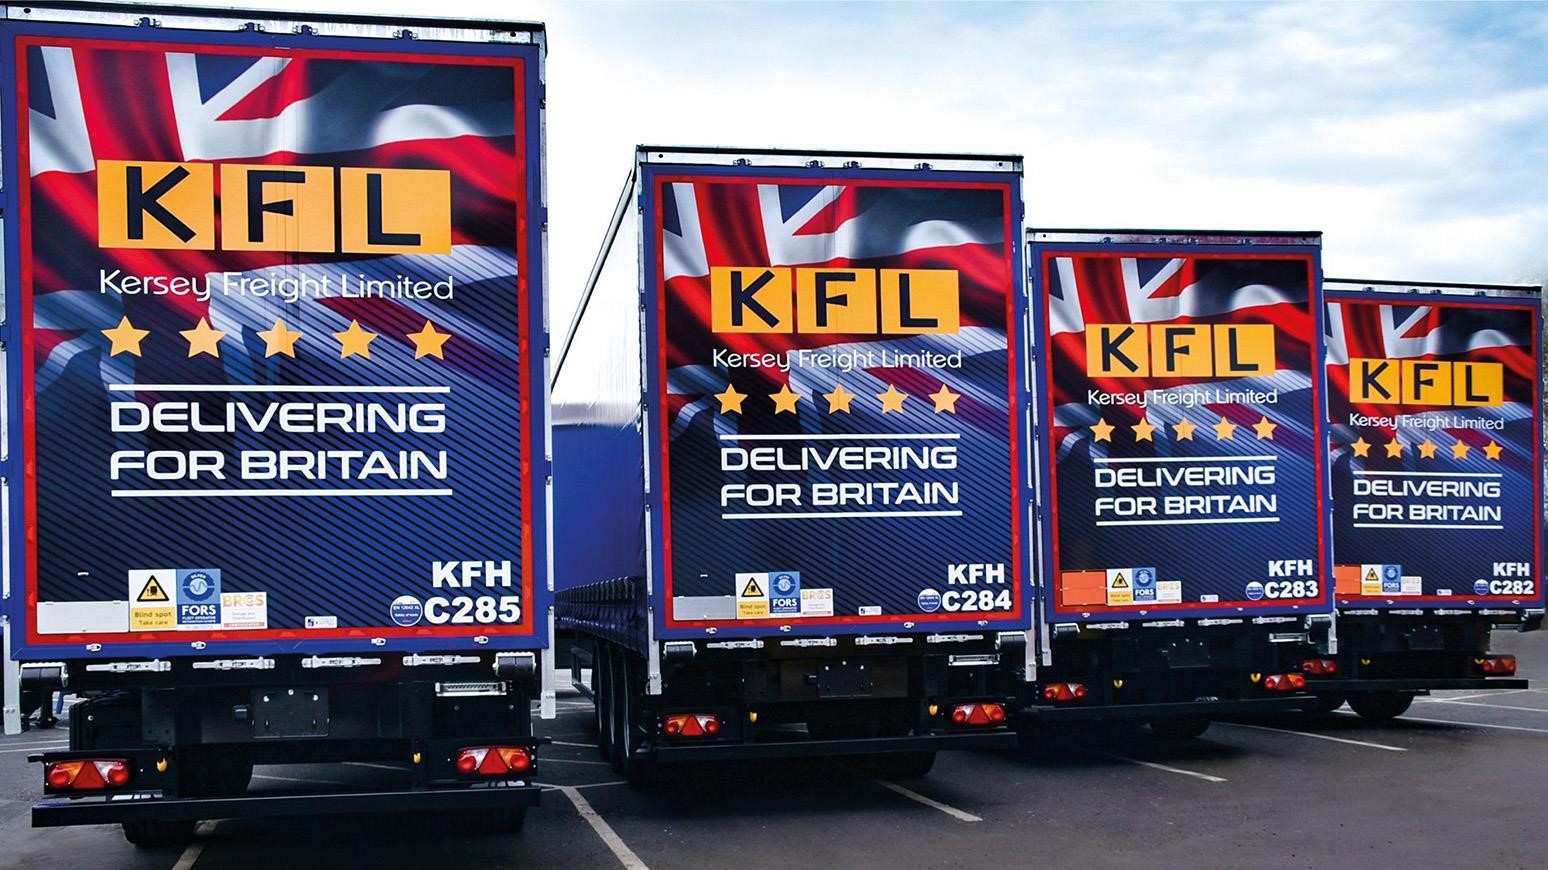 Suffolk-Based Kerry Freight Ltd Adds 20 New SDC Freespan Curtainsiders To Its 180-Trailer Fleet